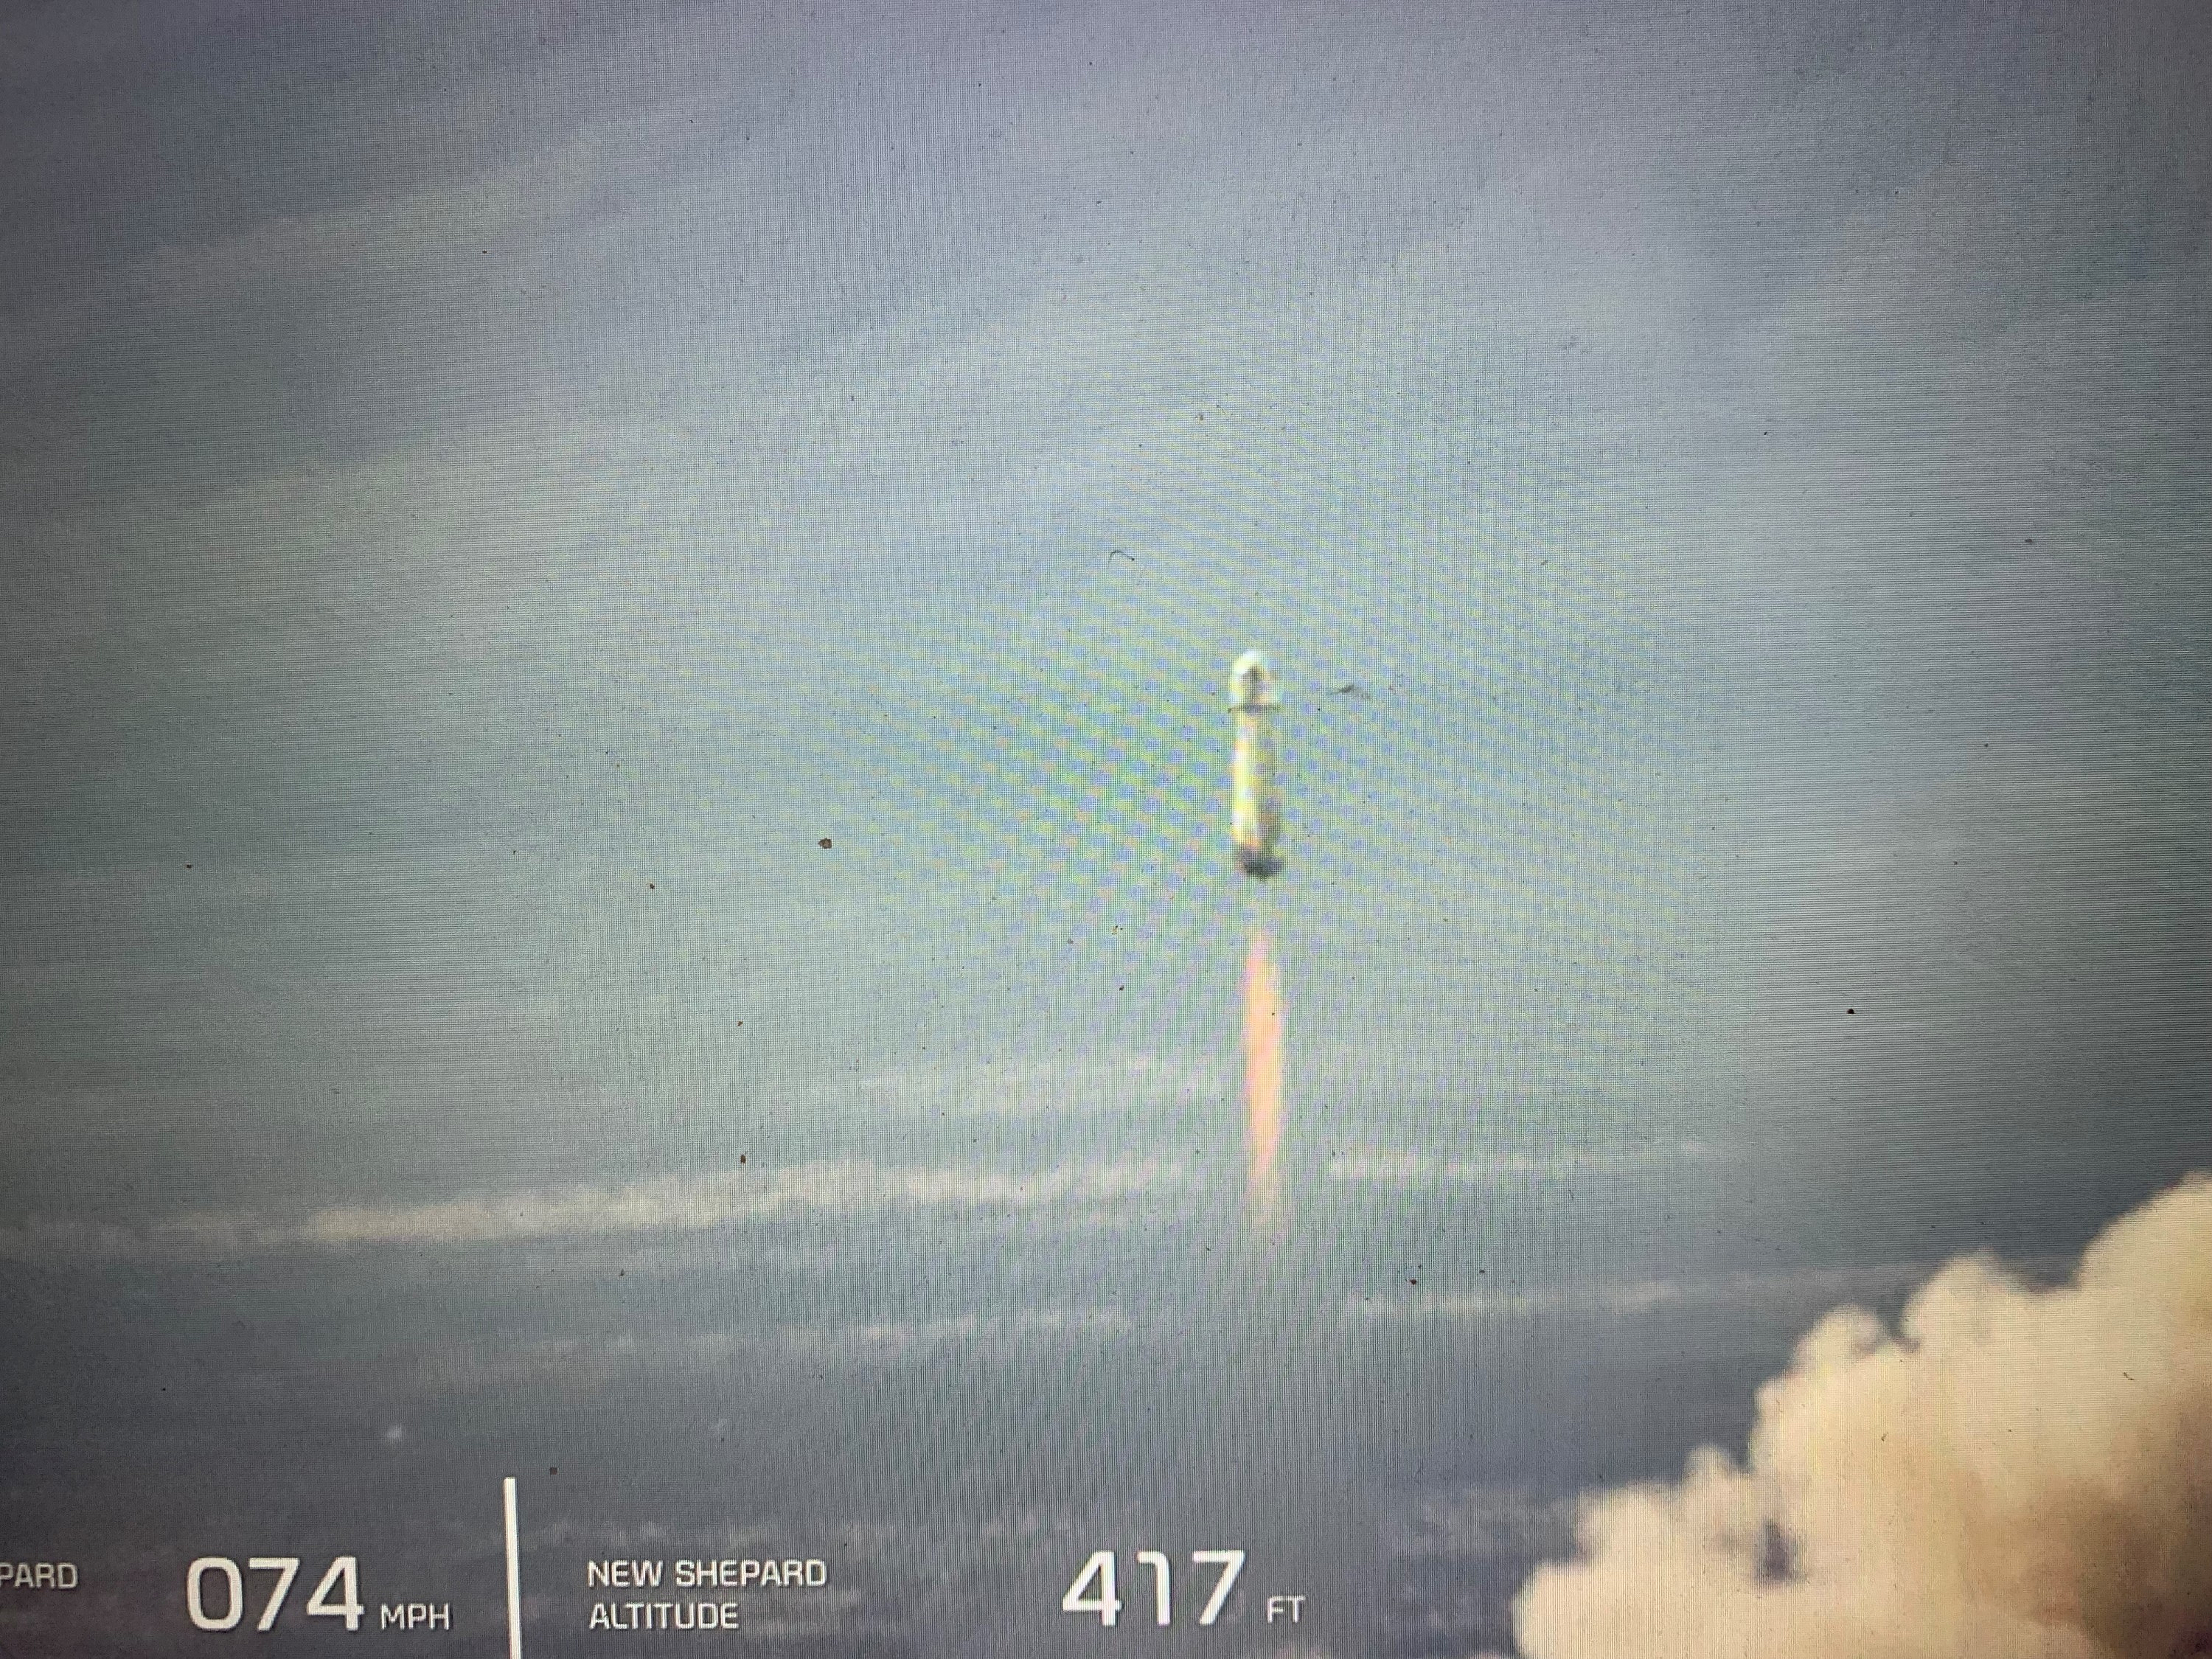 New Shepard, Jeff Bezos' small rocket, takes off for the first time more than a year after an accident